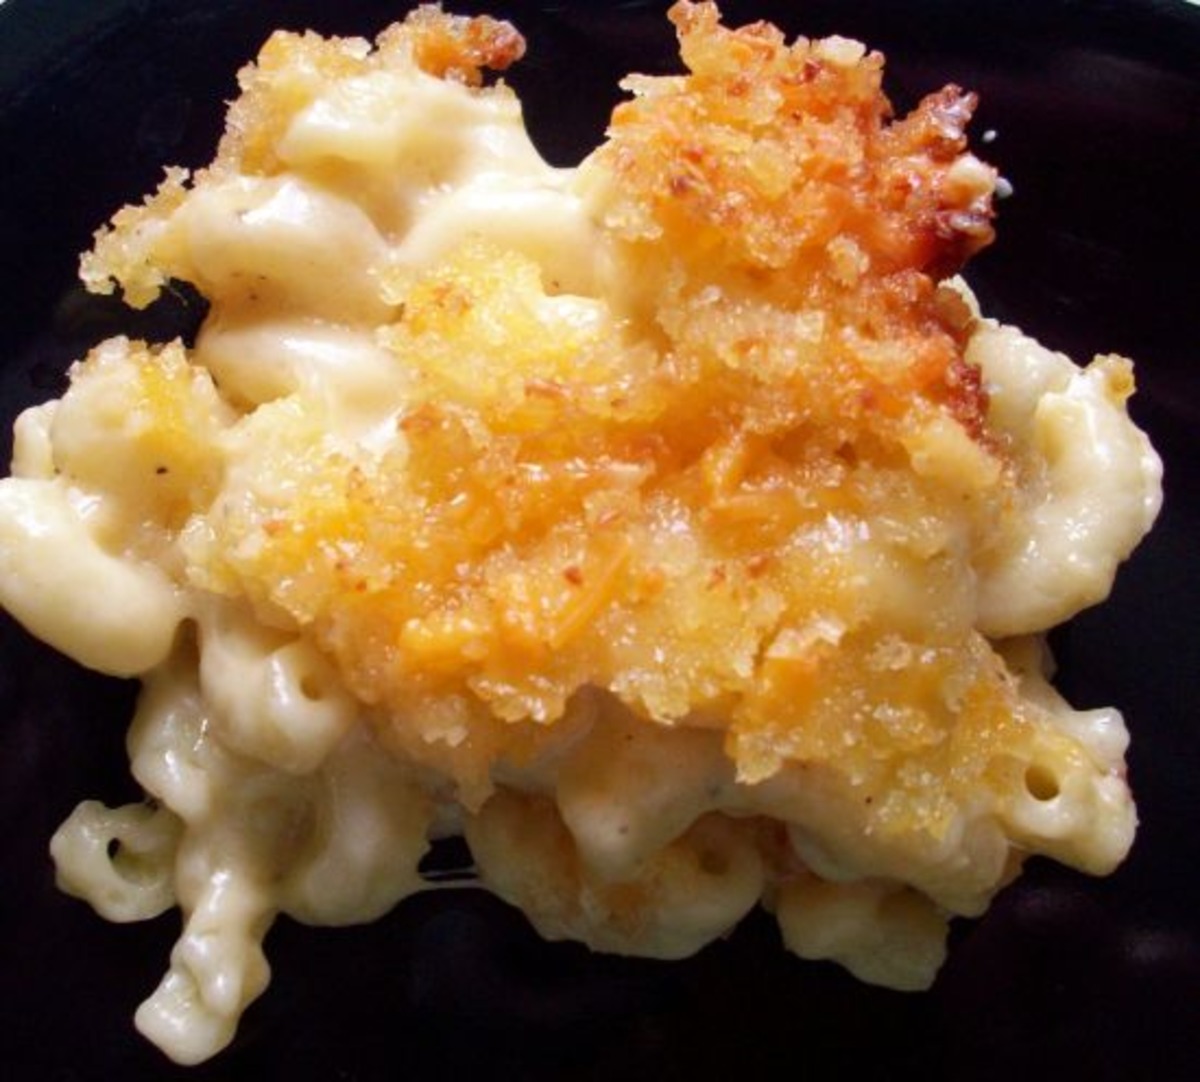 Baked Macaroni With Three Cheeses image